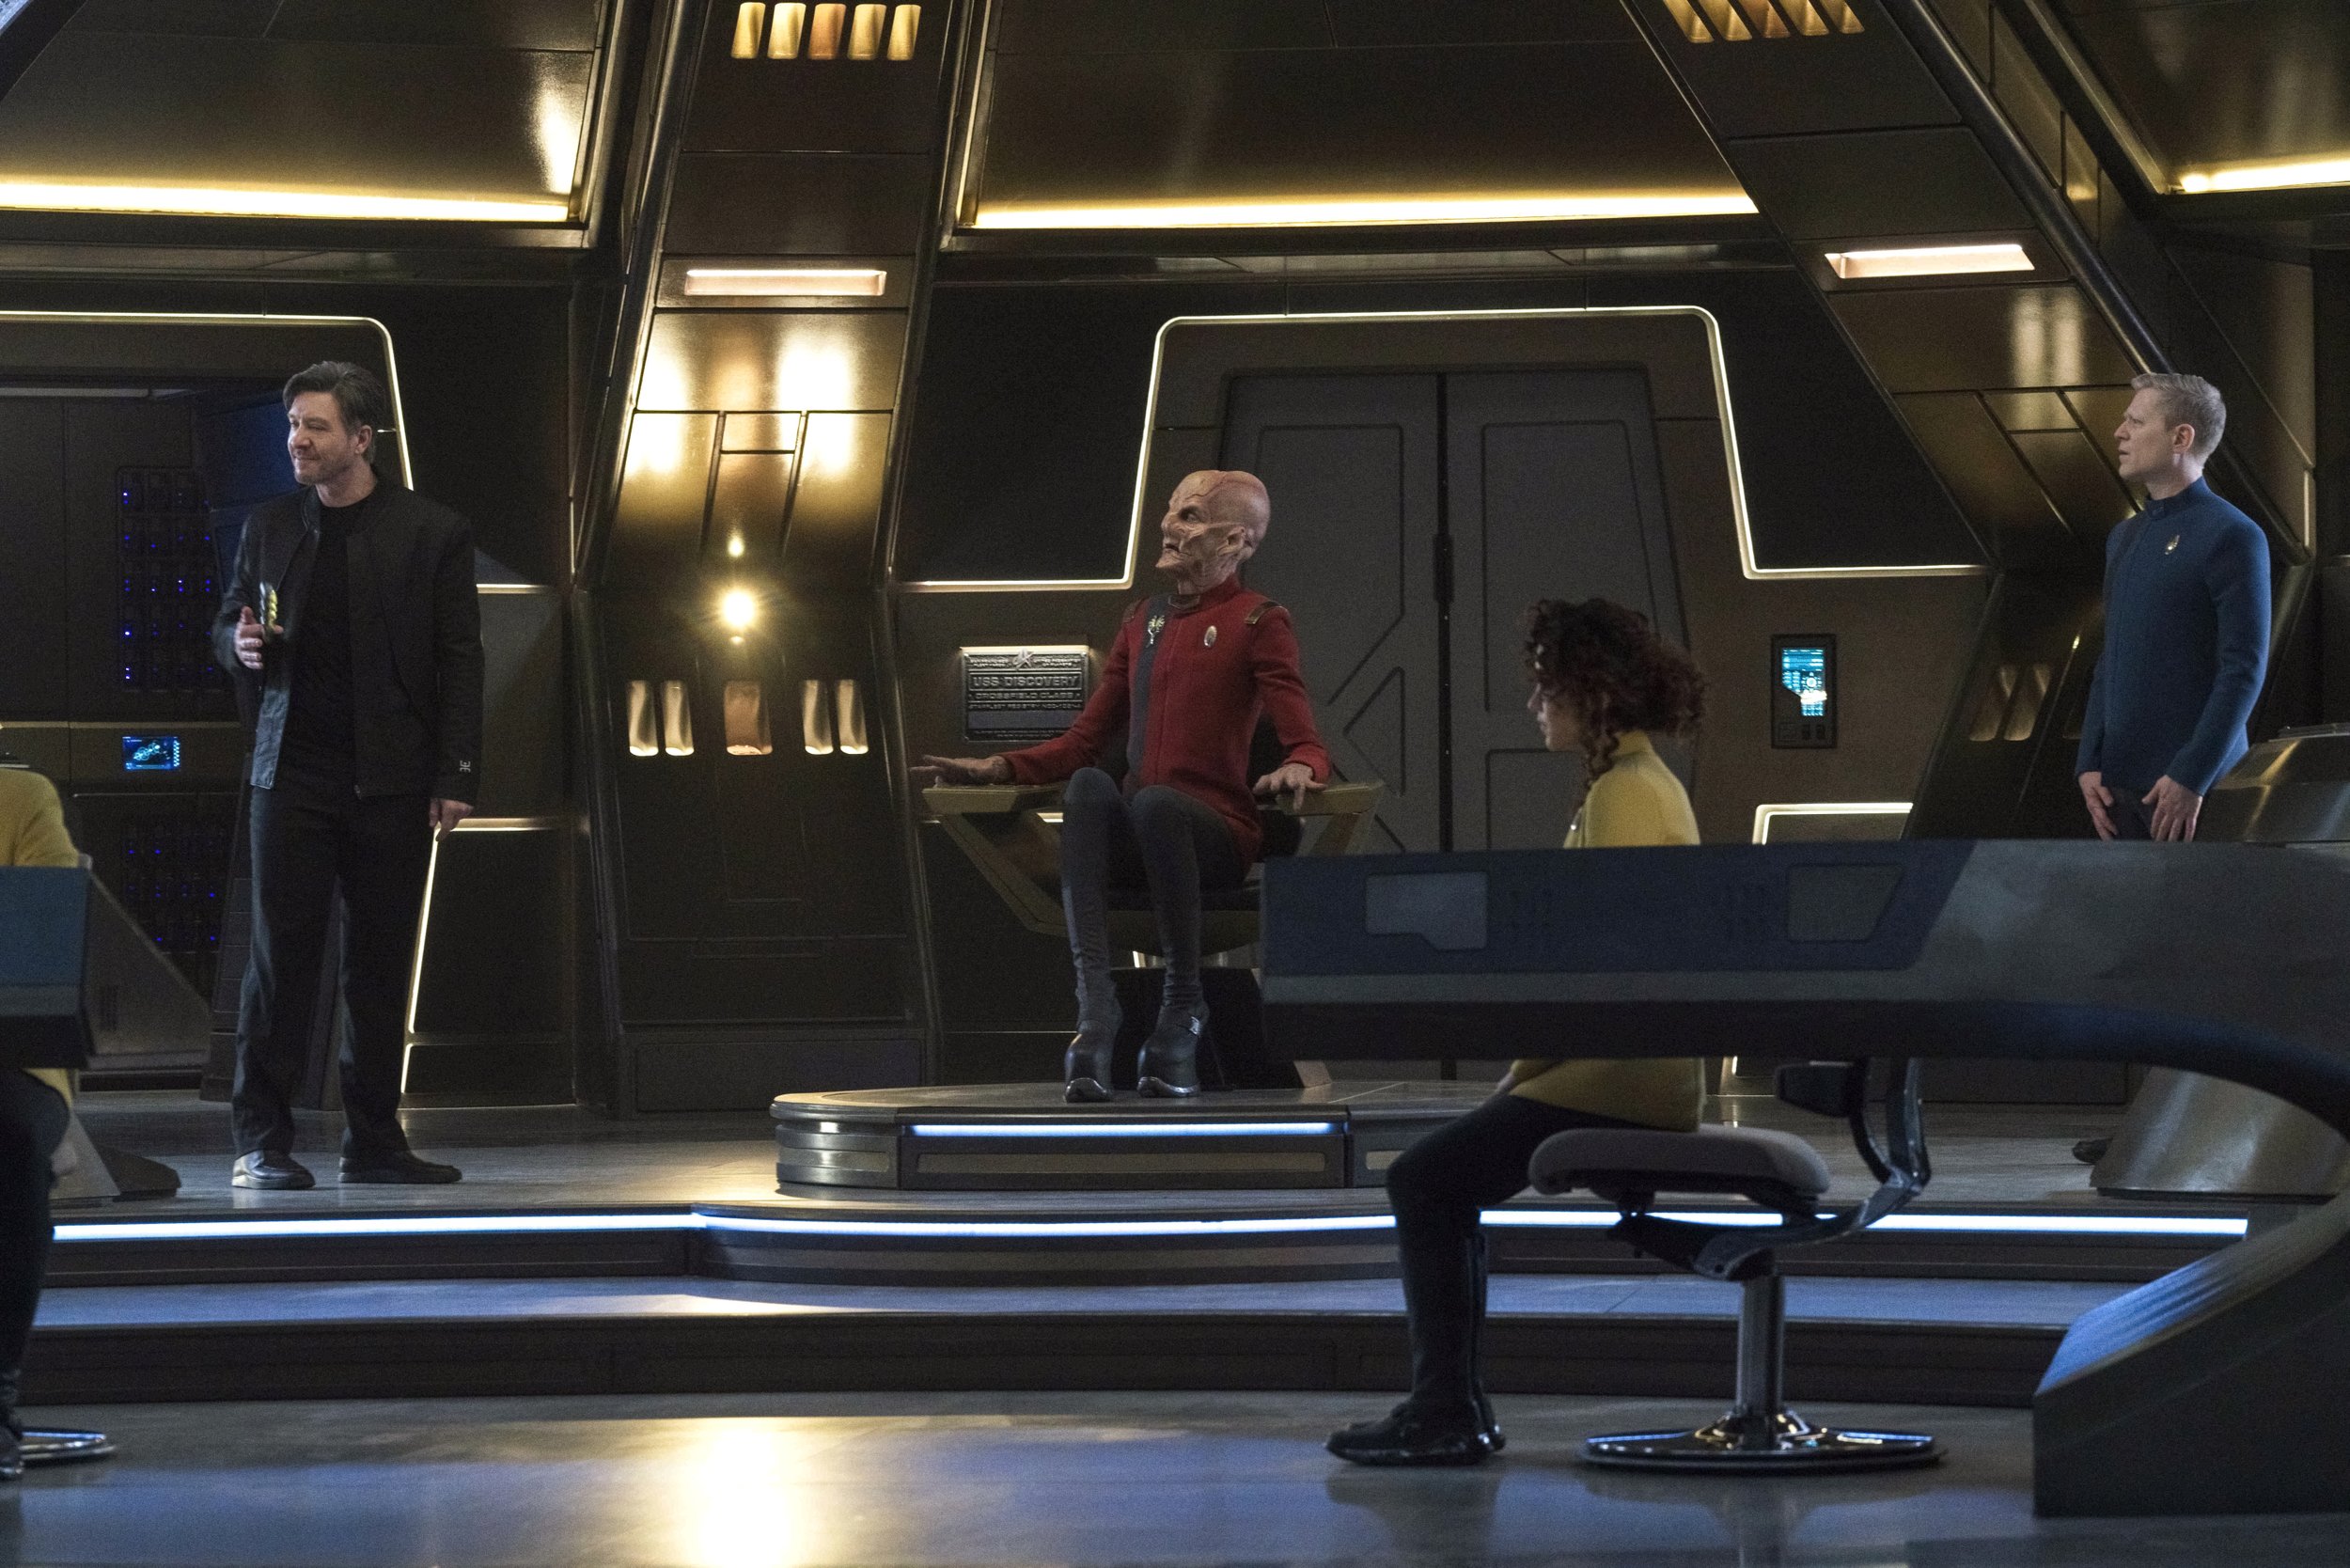   Pictured: Shawn Doyle as Ruon Tarka, Doug Jones as Saru and Anthony Rapp as Stamets of the Paramount+ original series STAR TREK: DISCOVERY. Photo Cr: Michael Gibson/Paramount+ (C) 2021 CBS Interactive. All Rights Reserved.  